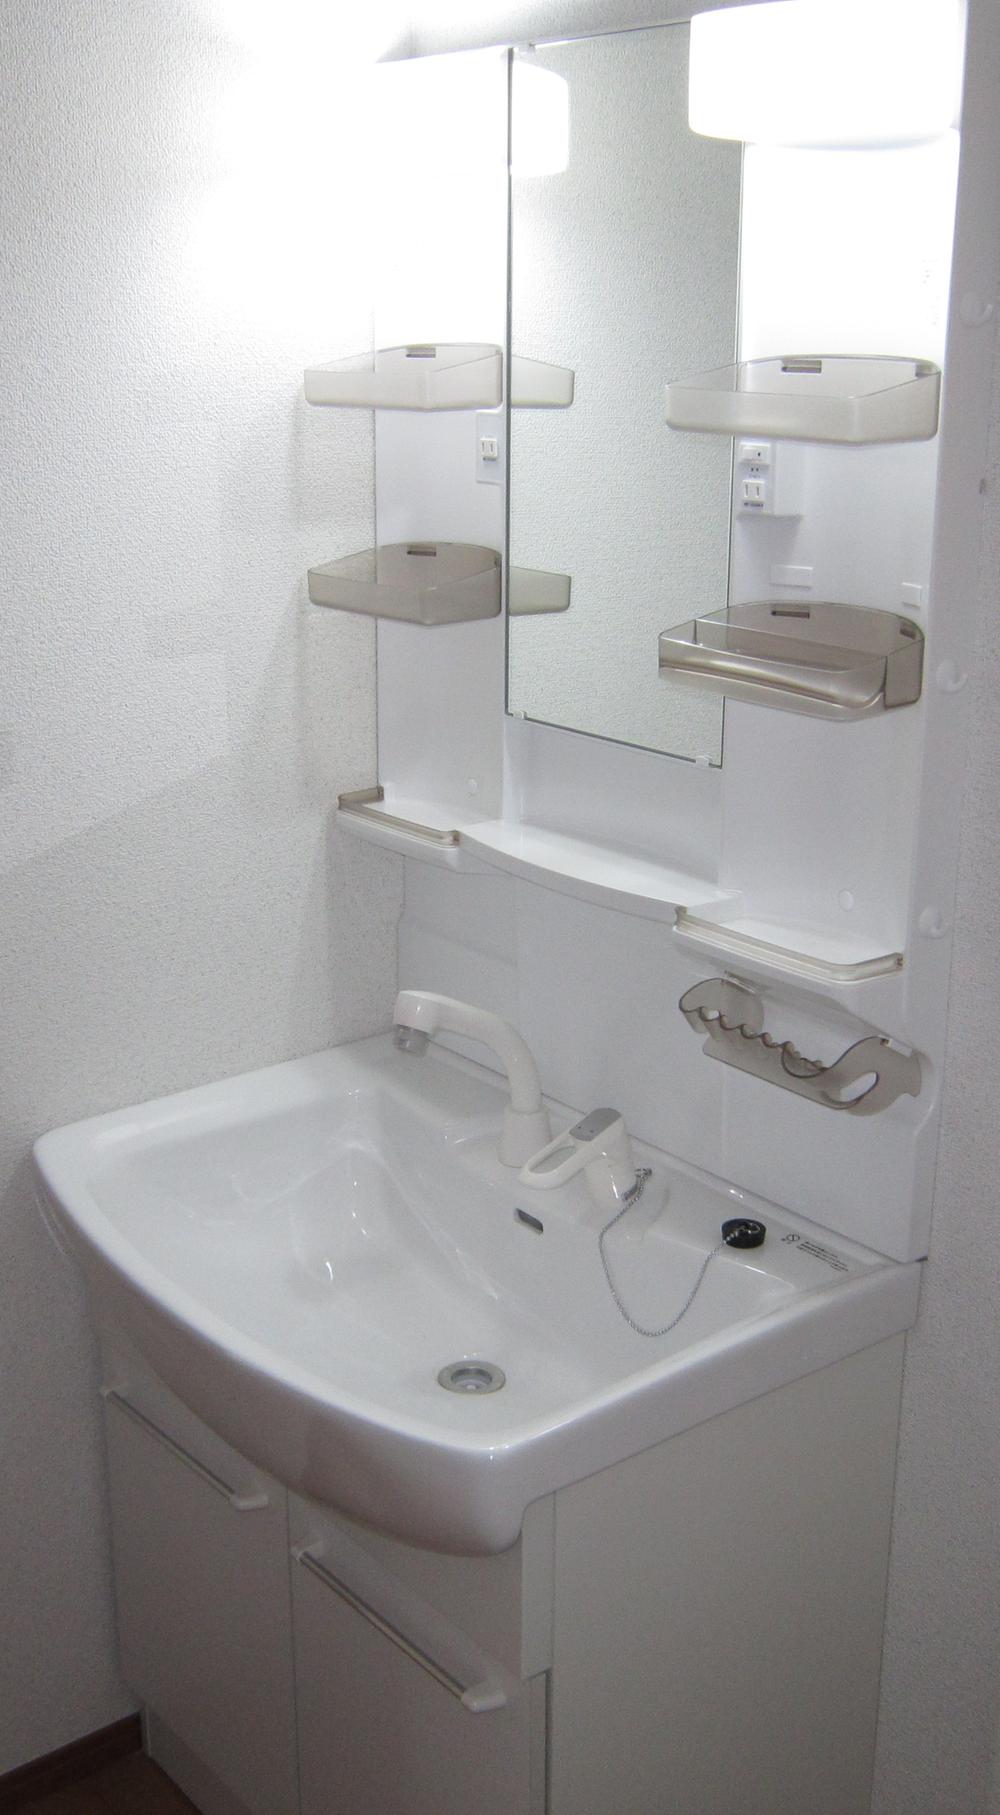 Wash basin, toilet. «Same specifications»